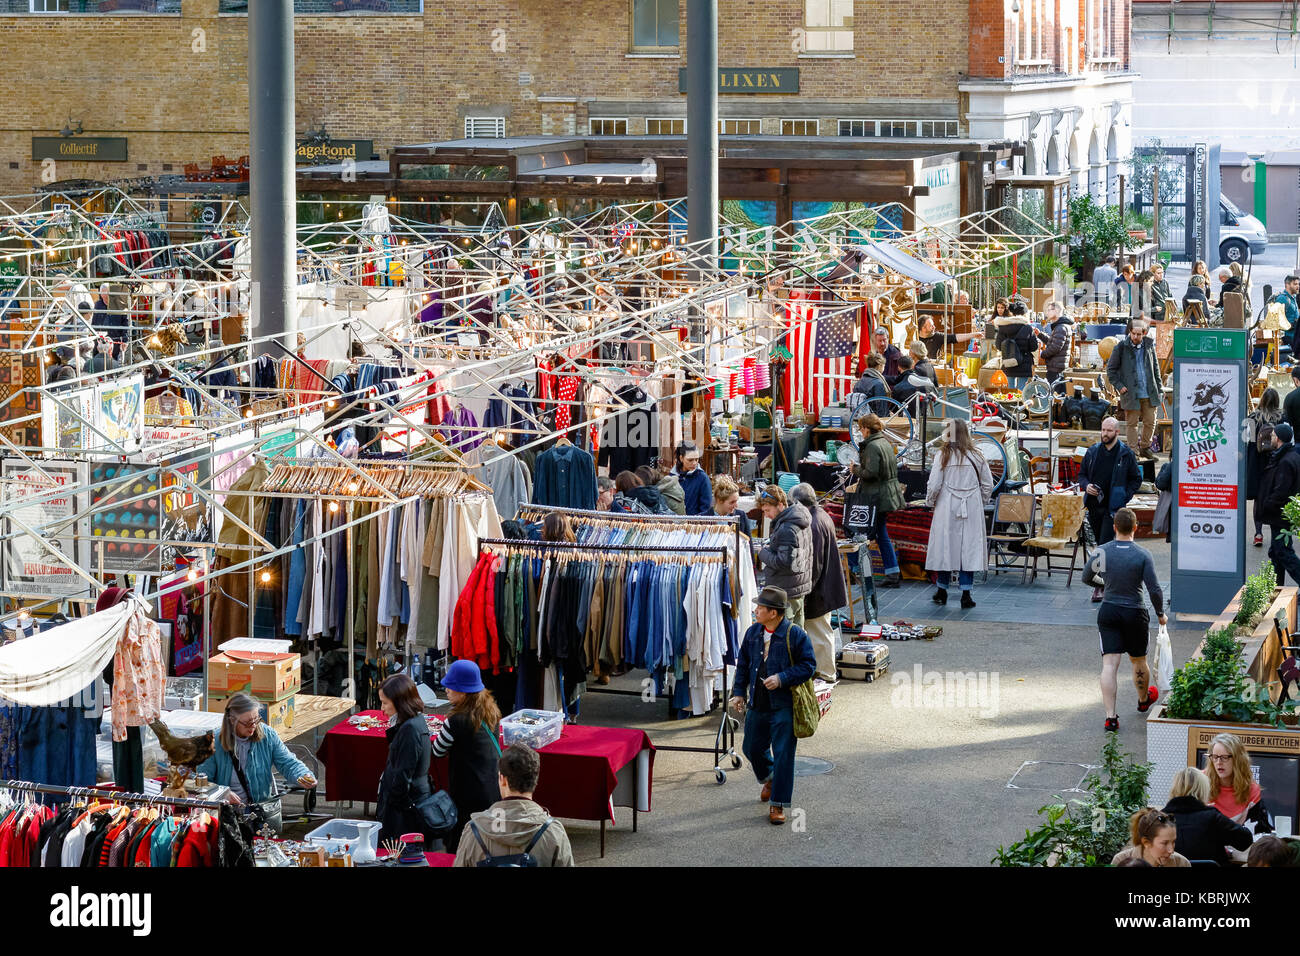 London, UK - September 30, 2017 - People shopping at Old Spitalfields Market, a known antique and vintage market in London Stock Photo